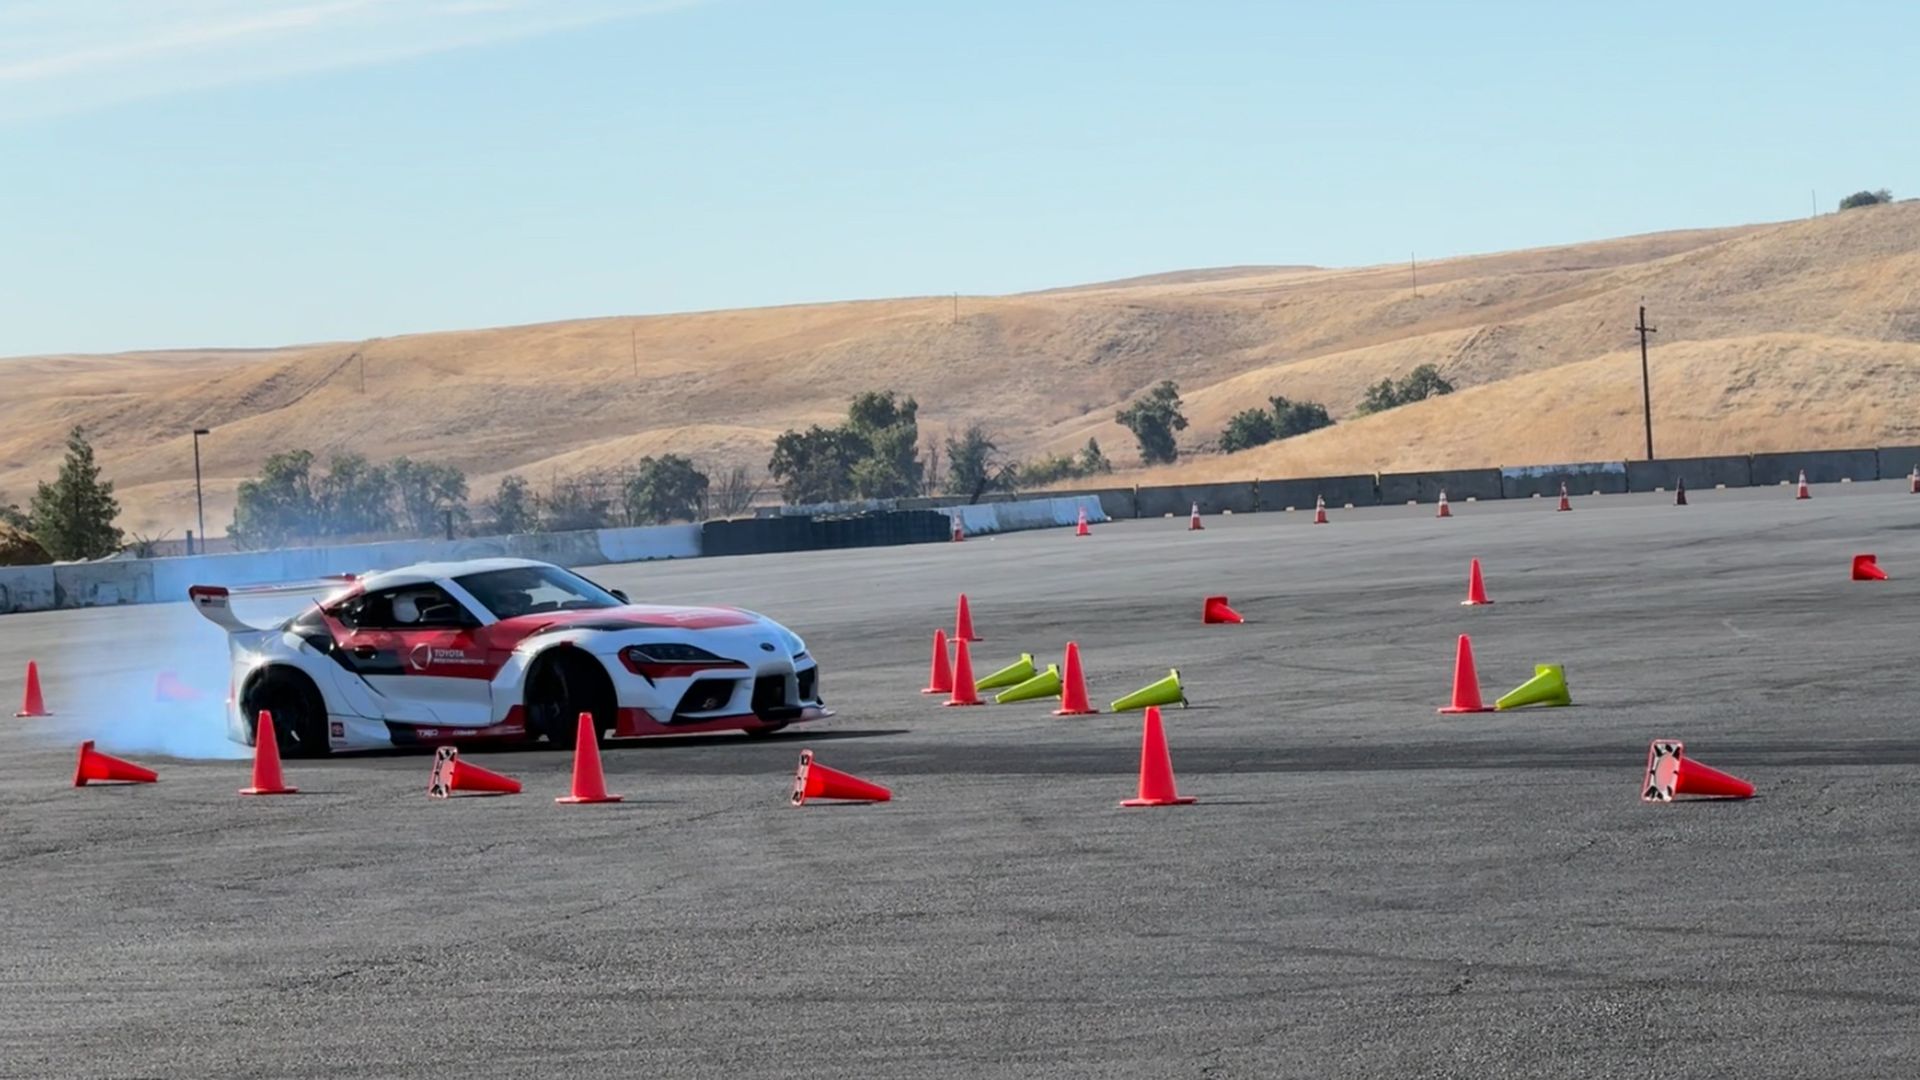 A Toyota self-driving test car navigates cones at a race track in Willows, Calif.